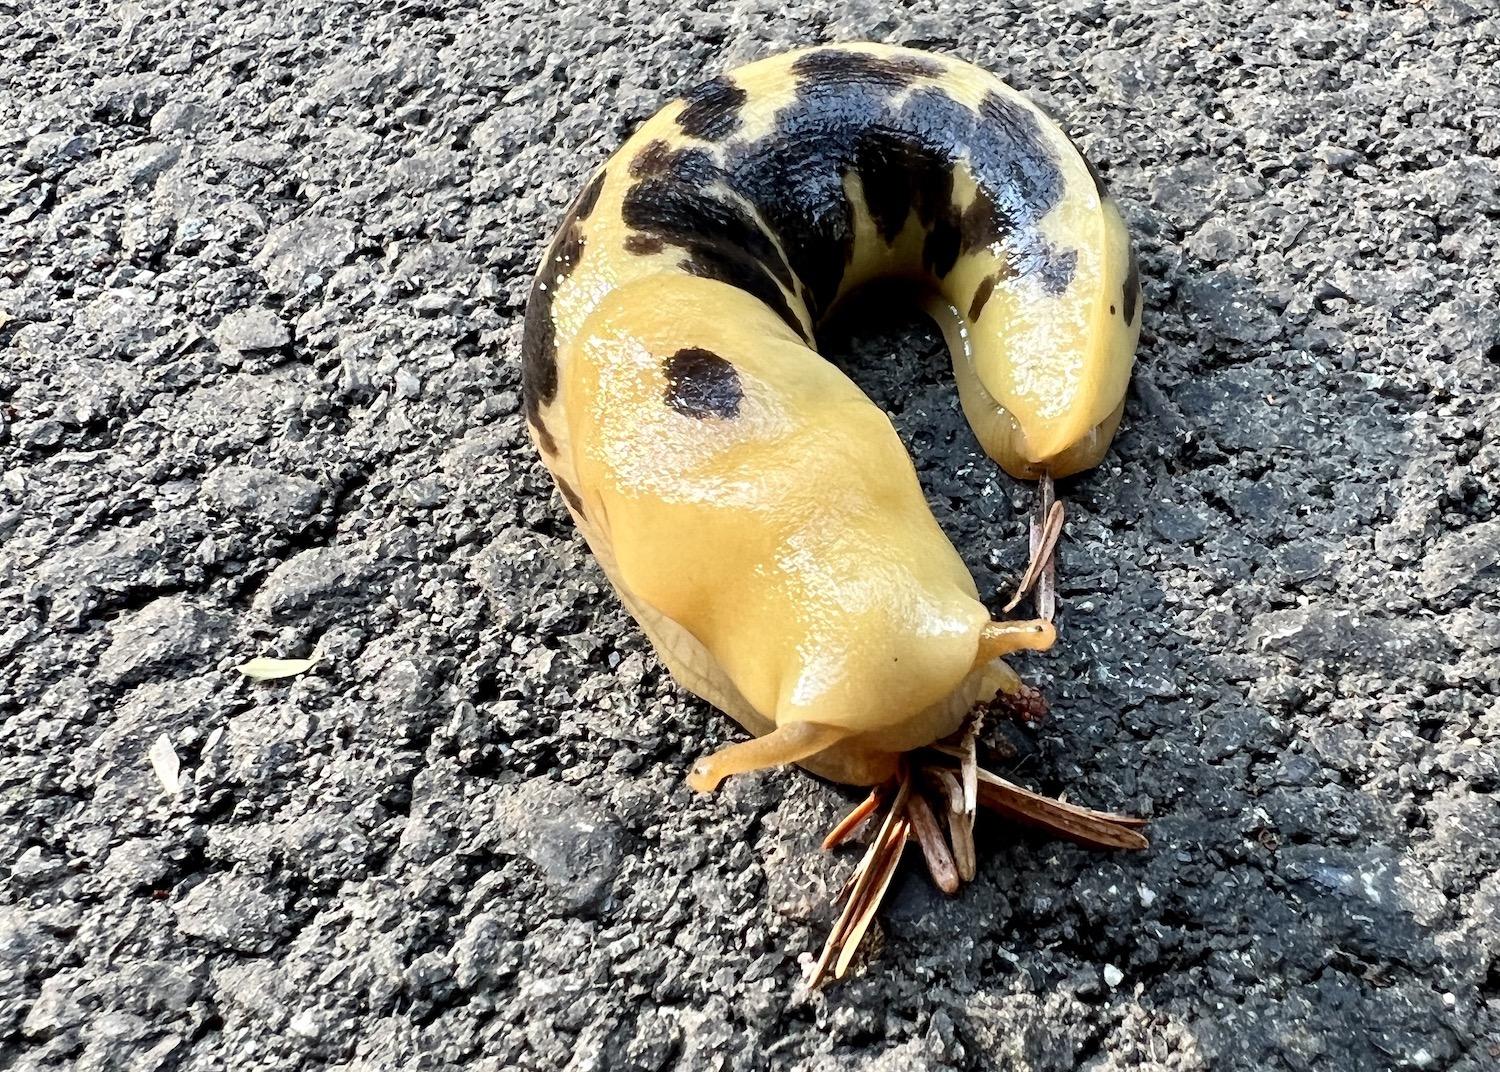 A banana slug munches away on the new asphalt pathway in Pacific Rim National Park Reserve's Long Beach Unit.